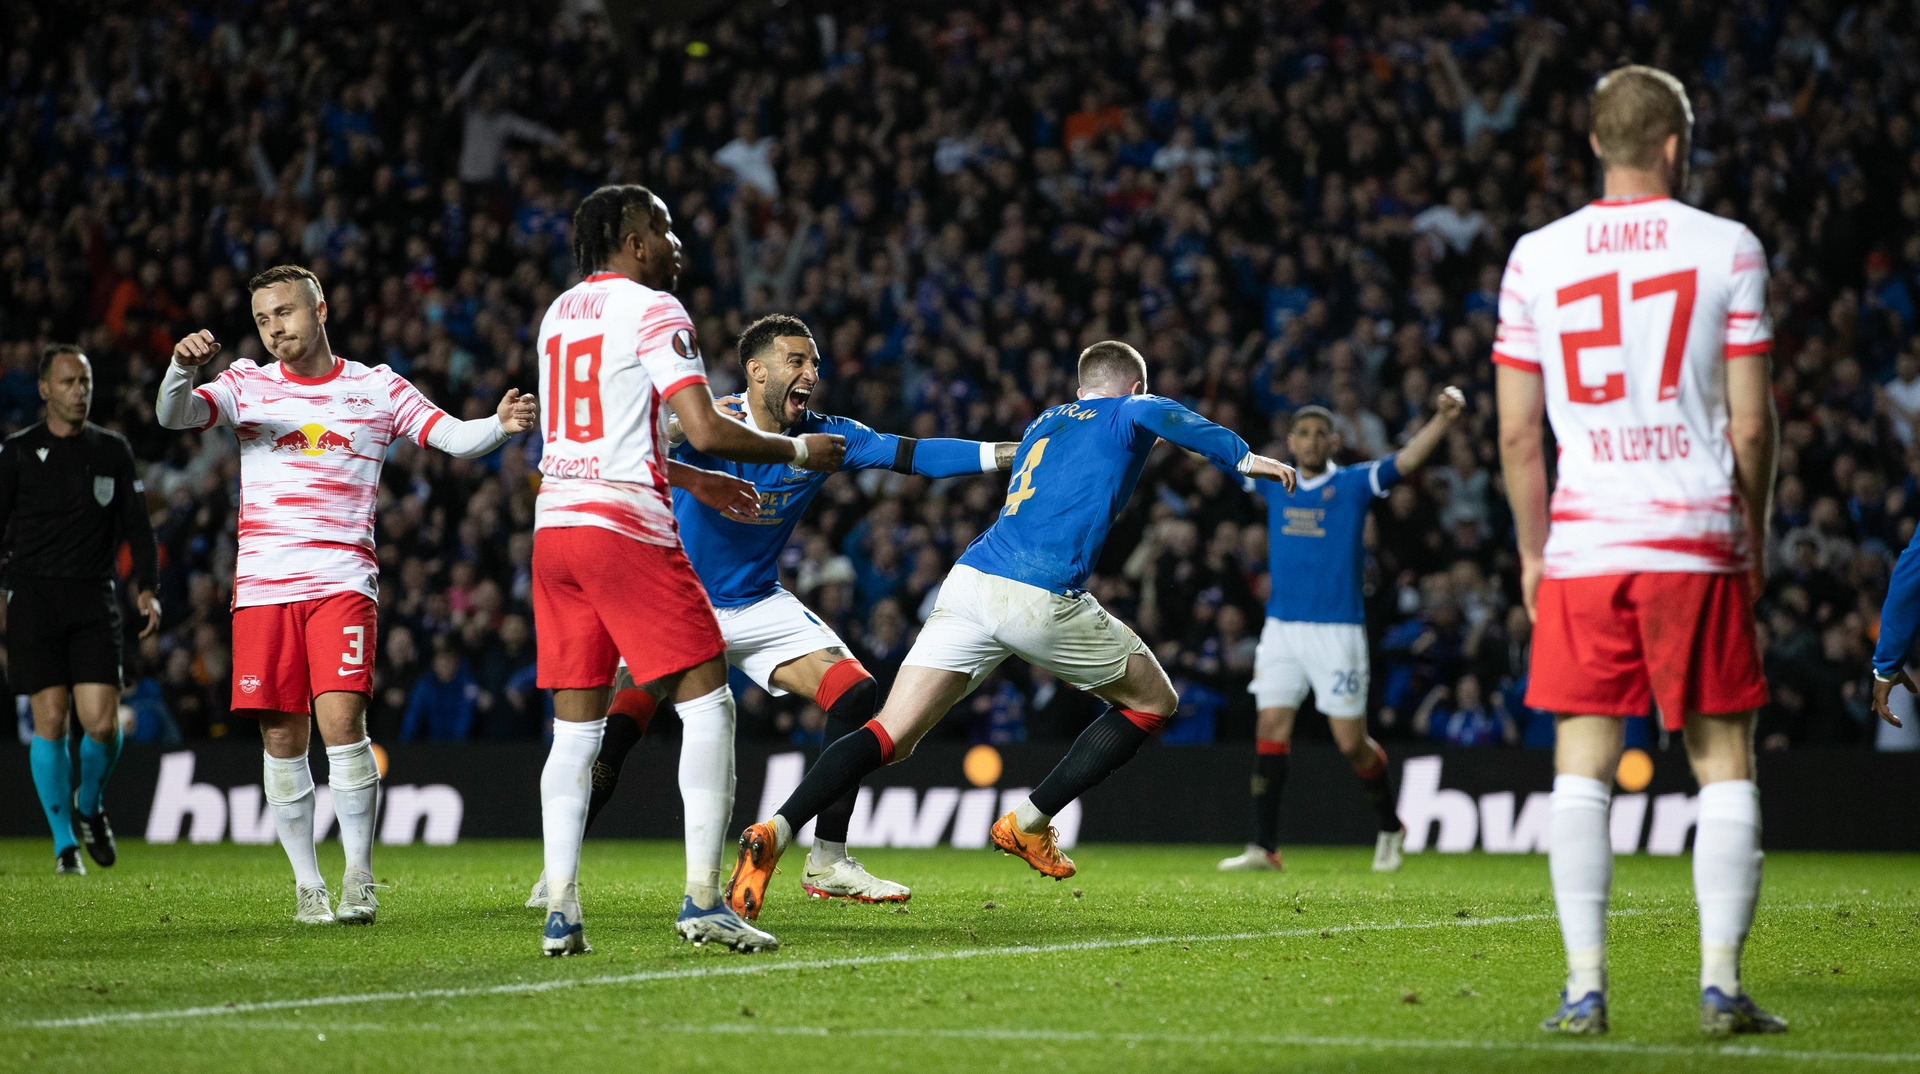 Rangers overwhelmed RB Leipzig at Ibrox to reach the final.